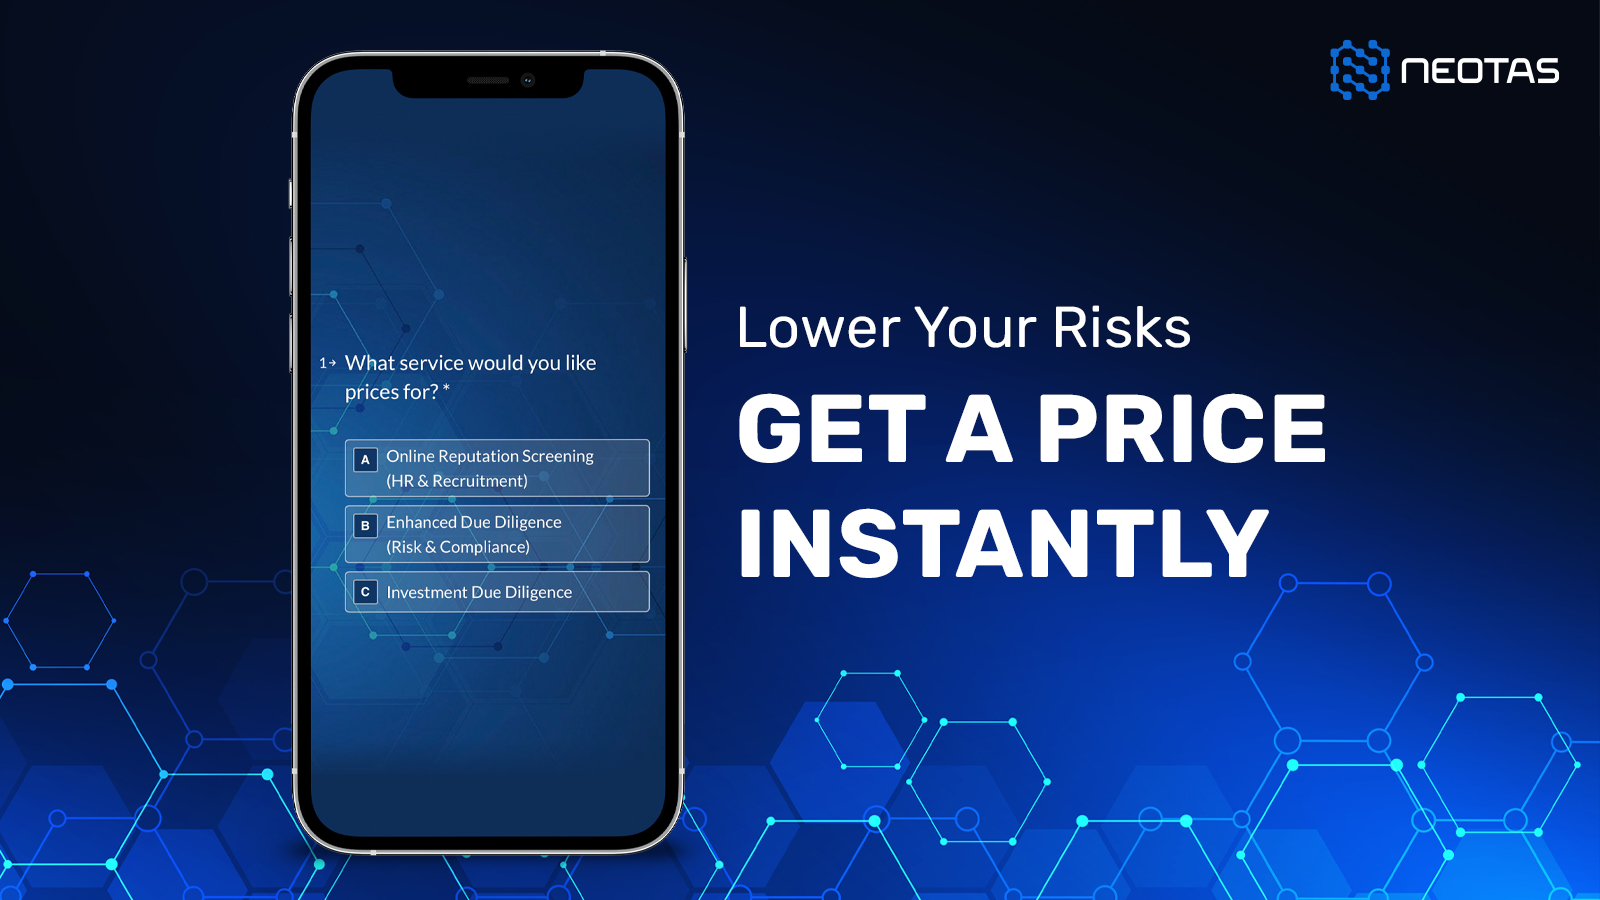 Neotas launch a mobile friendly pricing tool for due diligence and background screening estimates